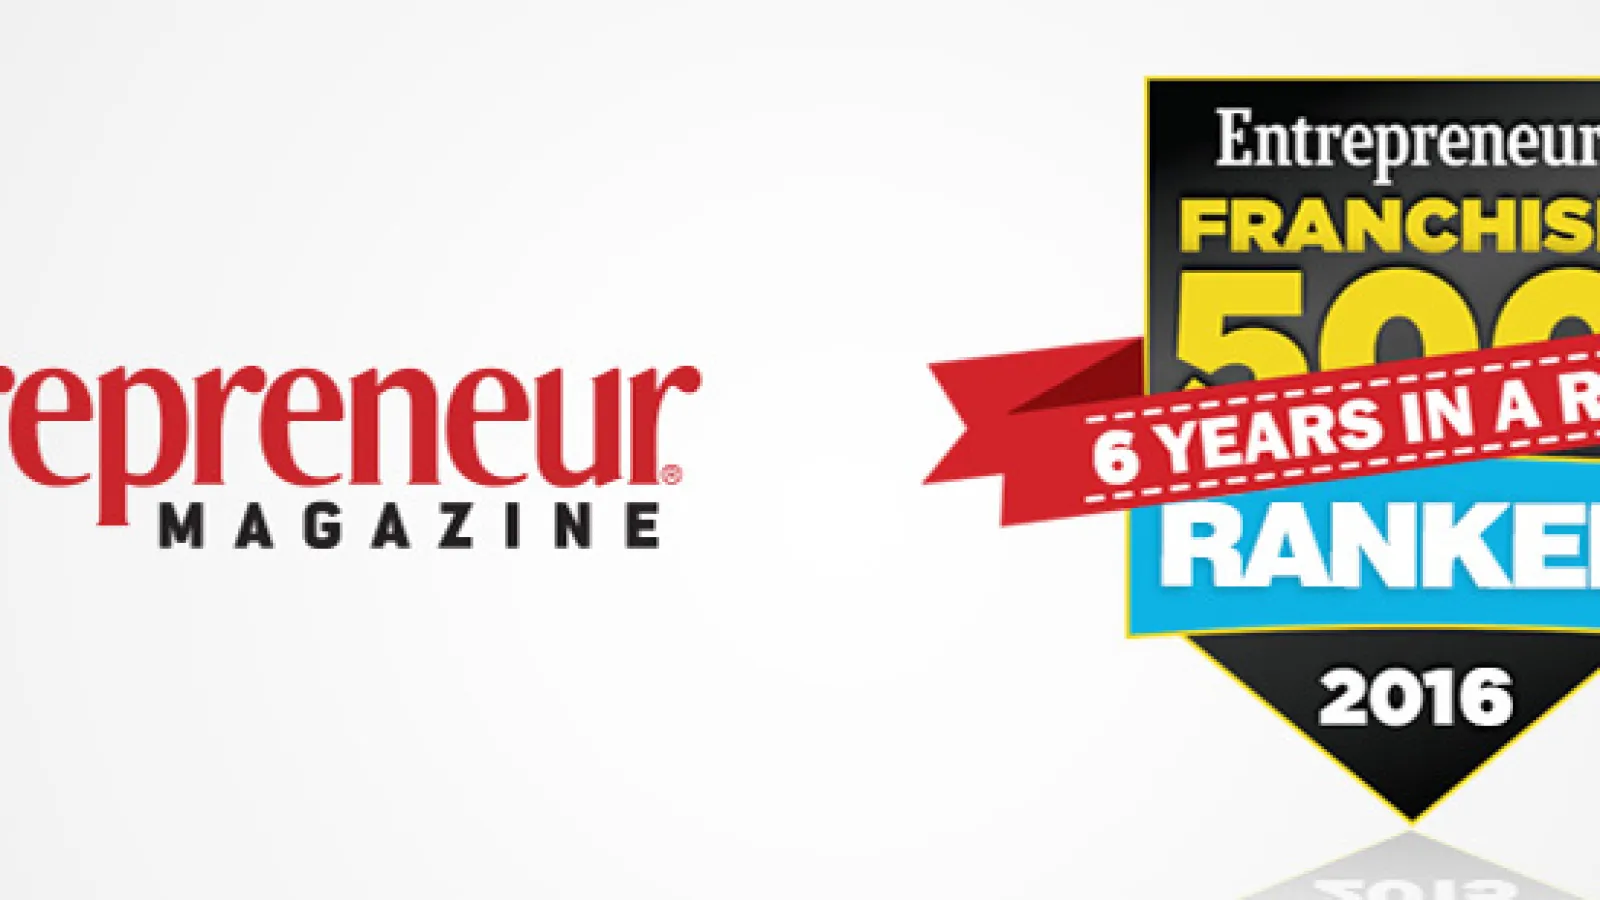 Sir Grout Recognized on Entrepreneur Magazine's Franchise 500 List for the Sixth Year in a Row